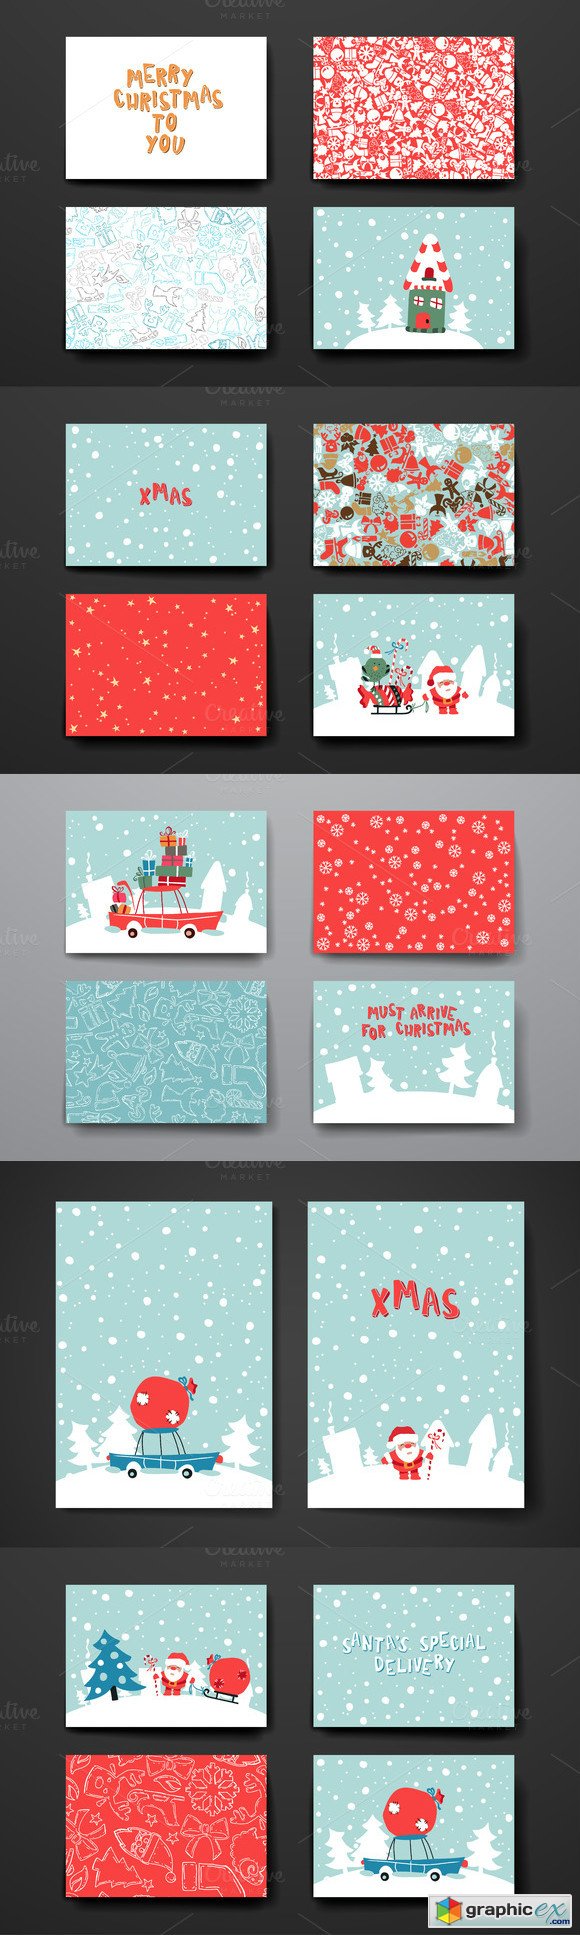 Set of Cards in Christmas style